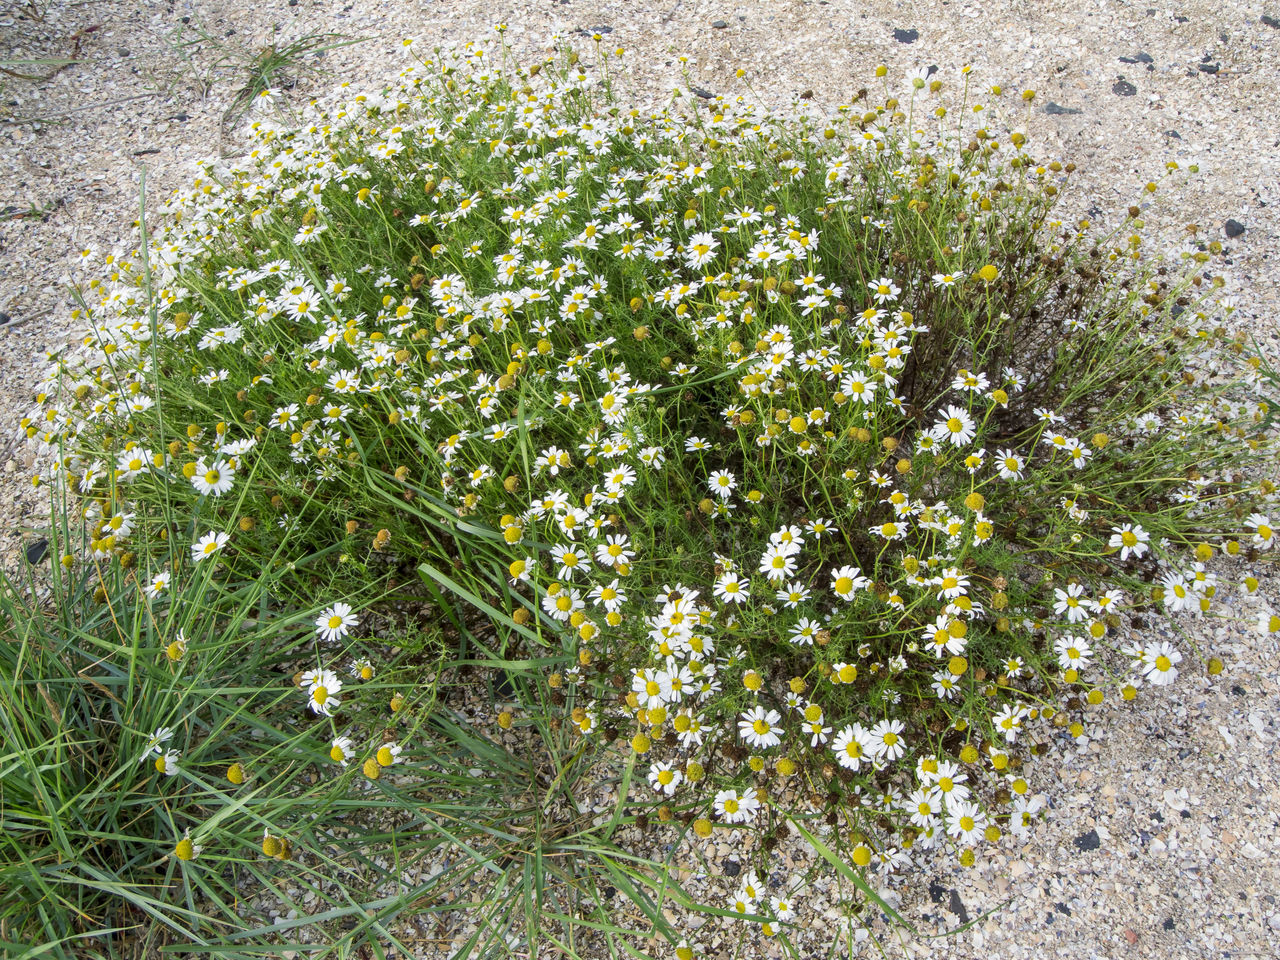 CLOSE-UP OF FLOWERING PLANT ON FIELD